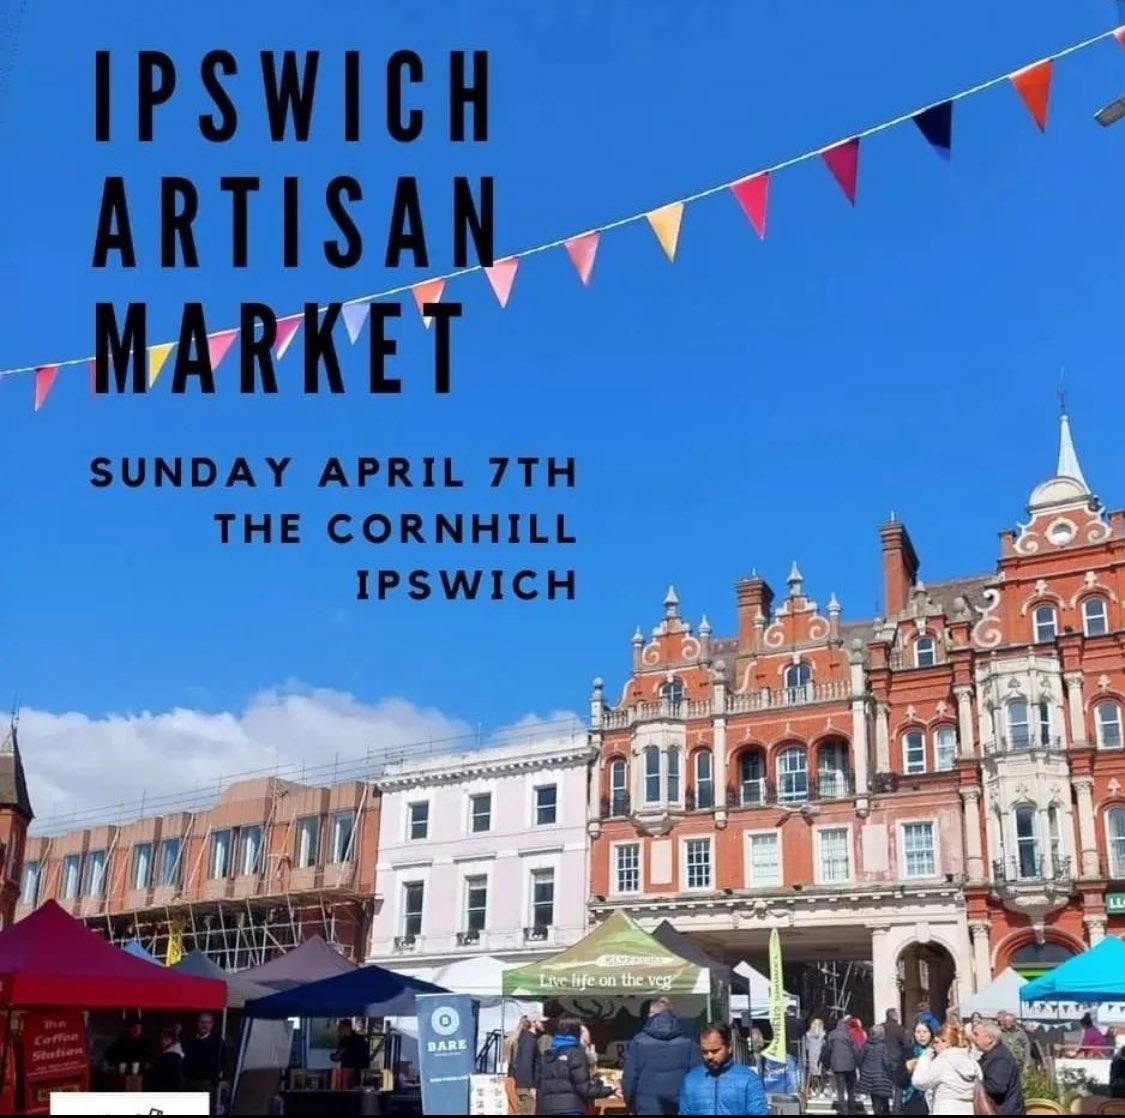 Head down to the Cornhill for today’s Artisan Market! 🛍️